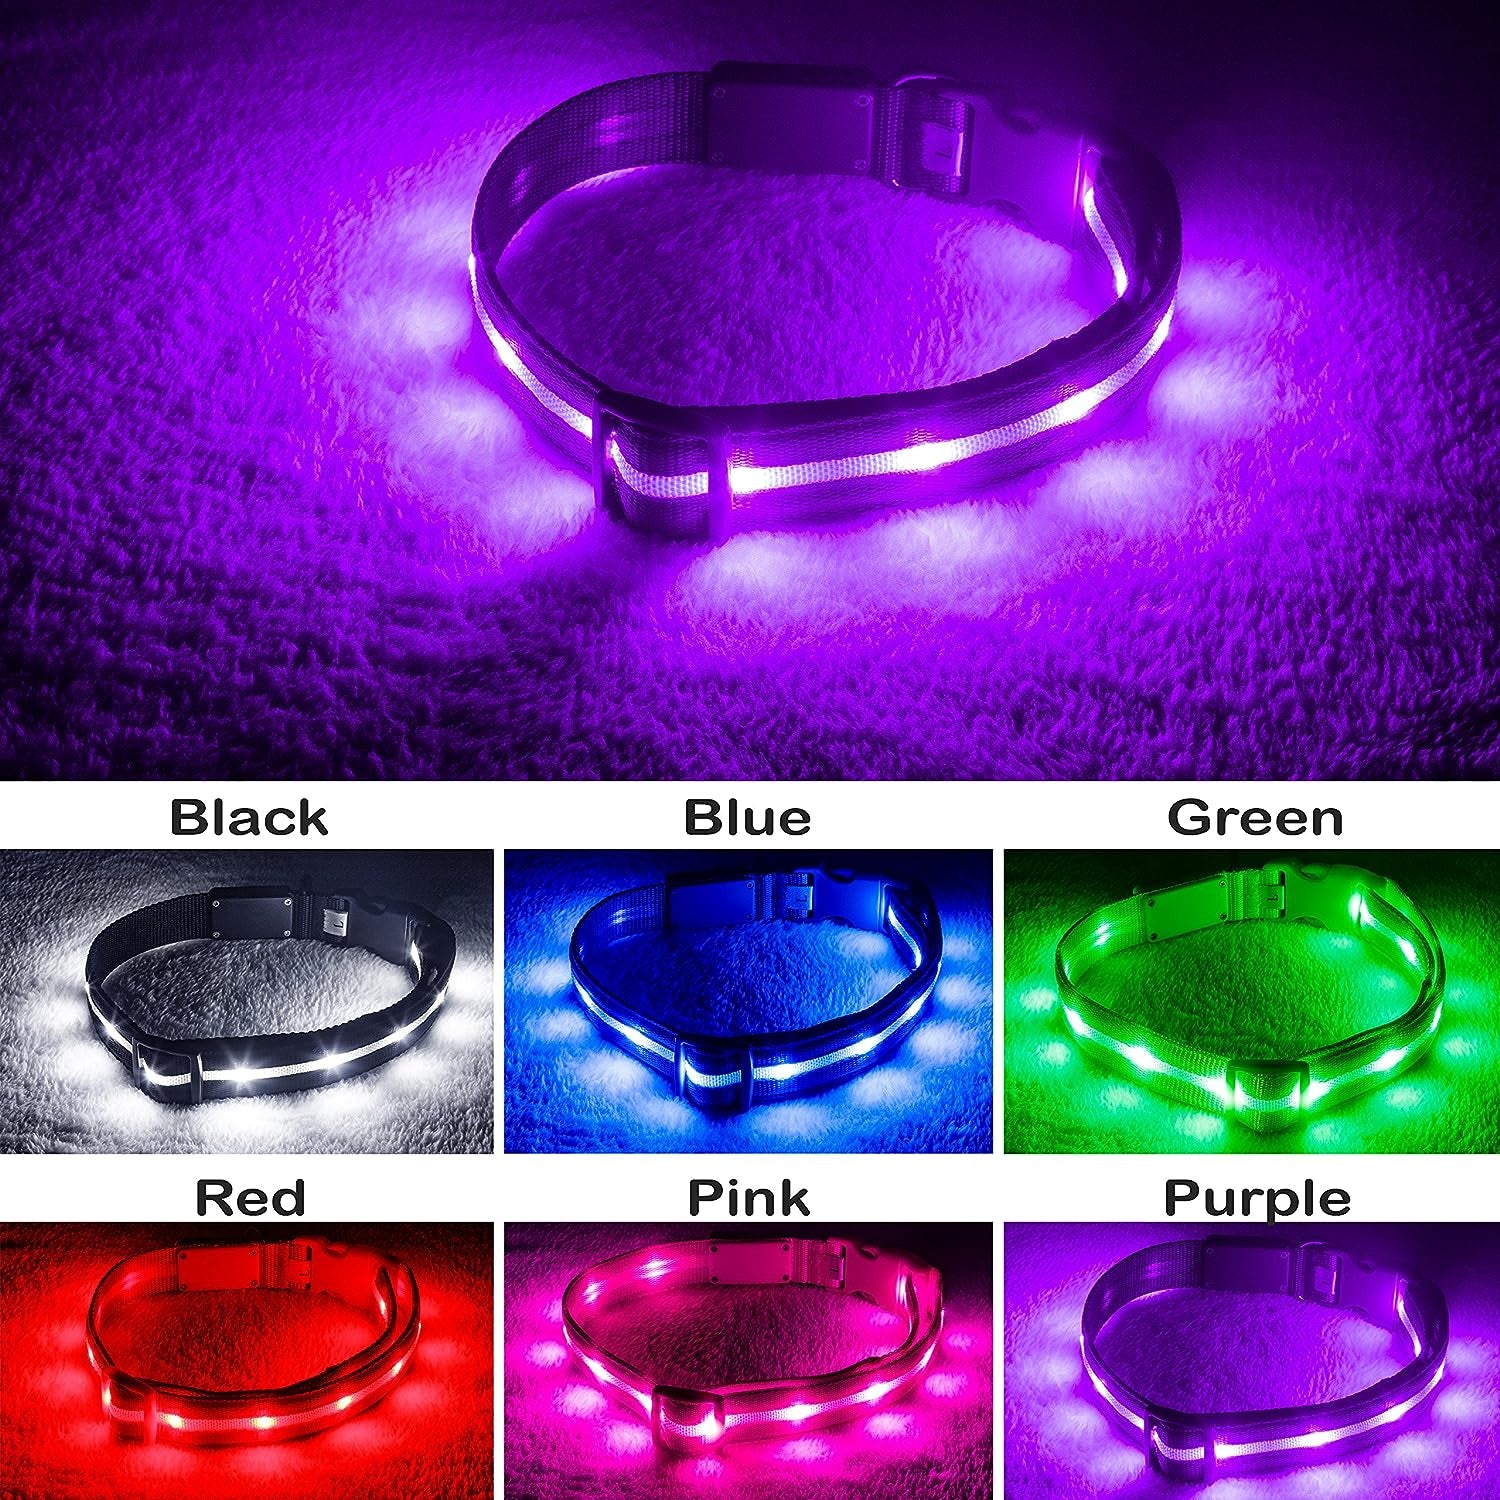 Light up Dog Collars with 1,000 Feet of Visibility - Brightest Glow Dog Collar Light - USB Rechargeable Waterproof LED Dog Collar - Dog Lights for Night Walking Keeps Your Pets Safe in the Dark